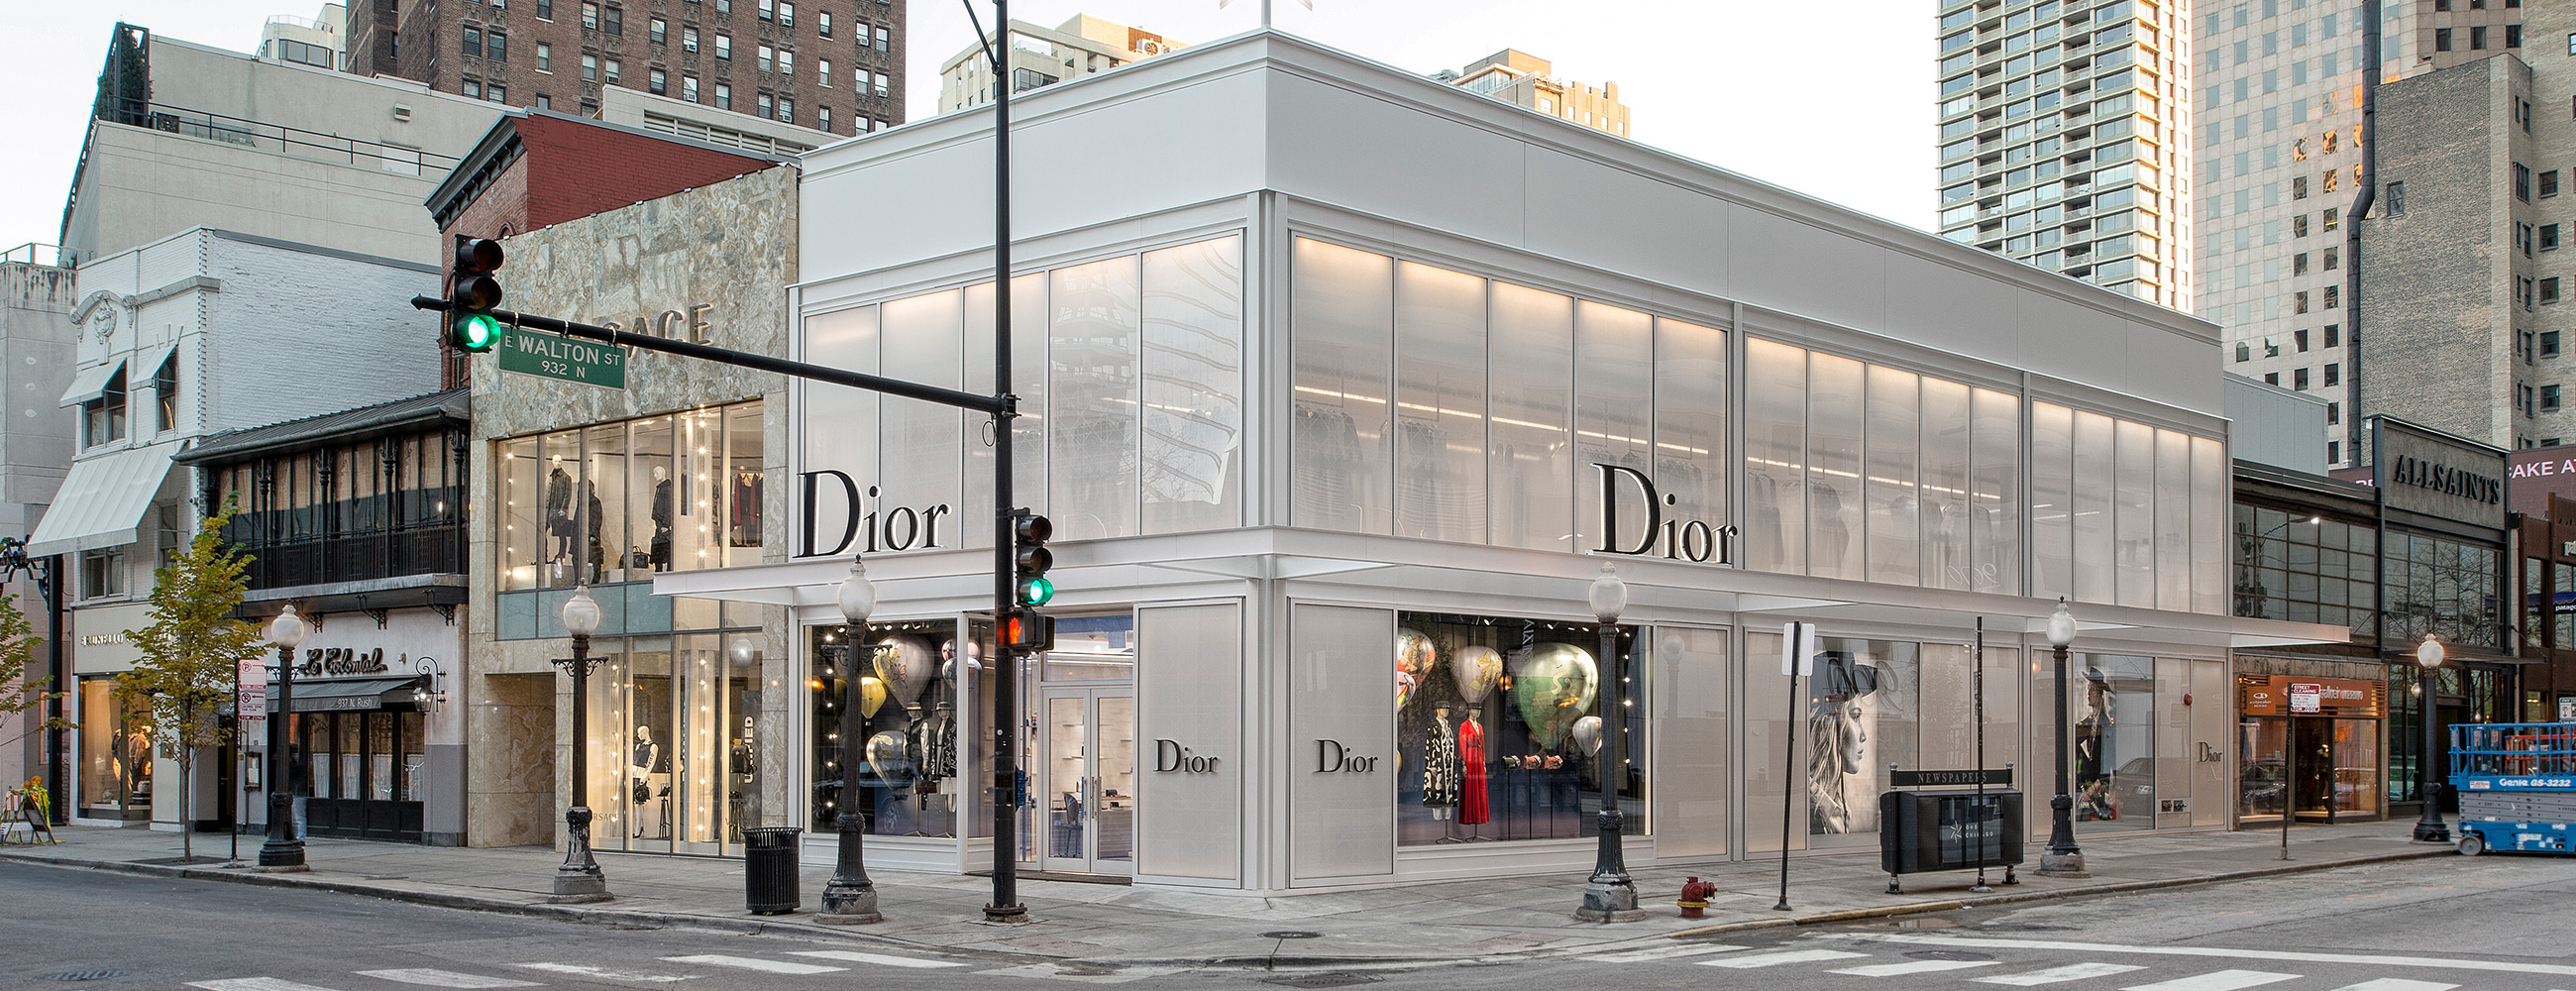 Exterior, street view of Dior flagship in Chicago, AGNORA fabricated Insulated Glass Units up to 146